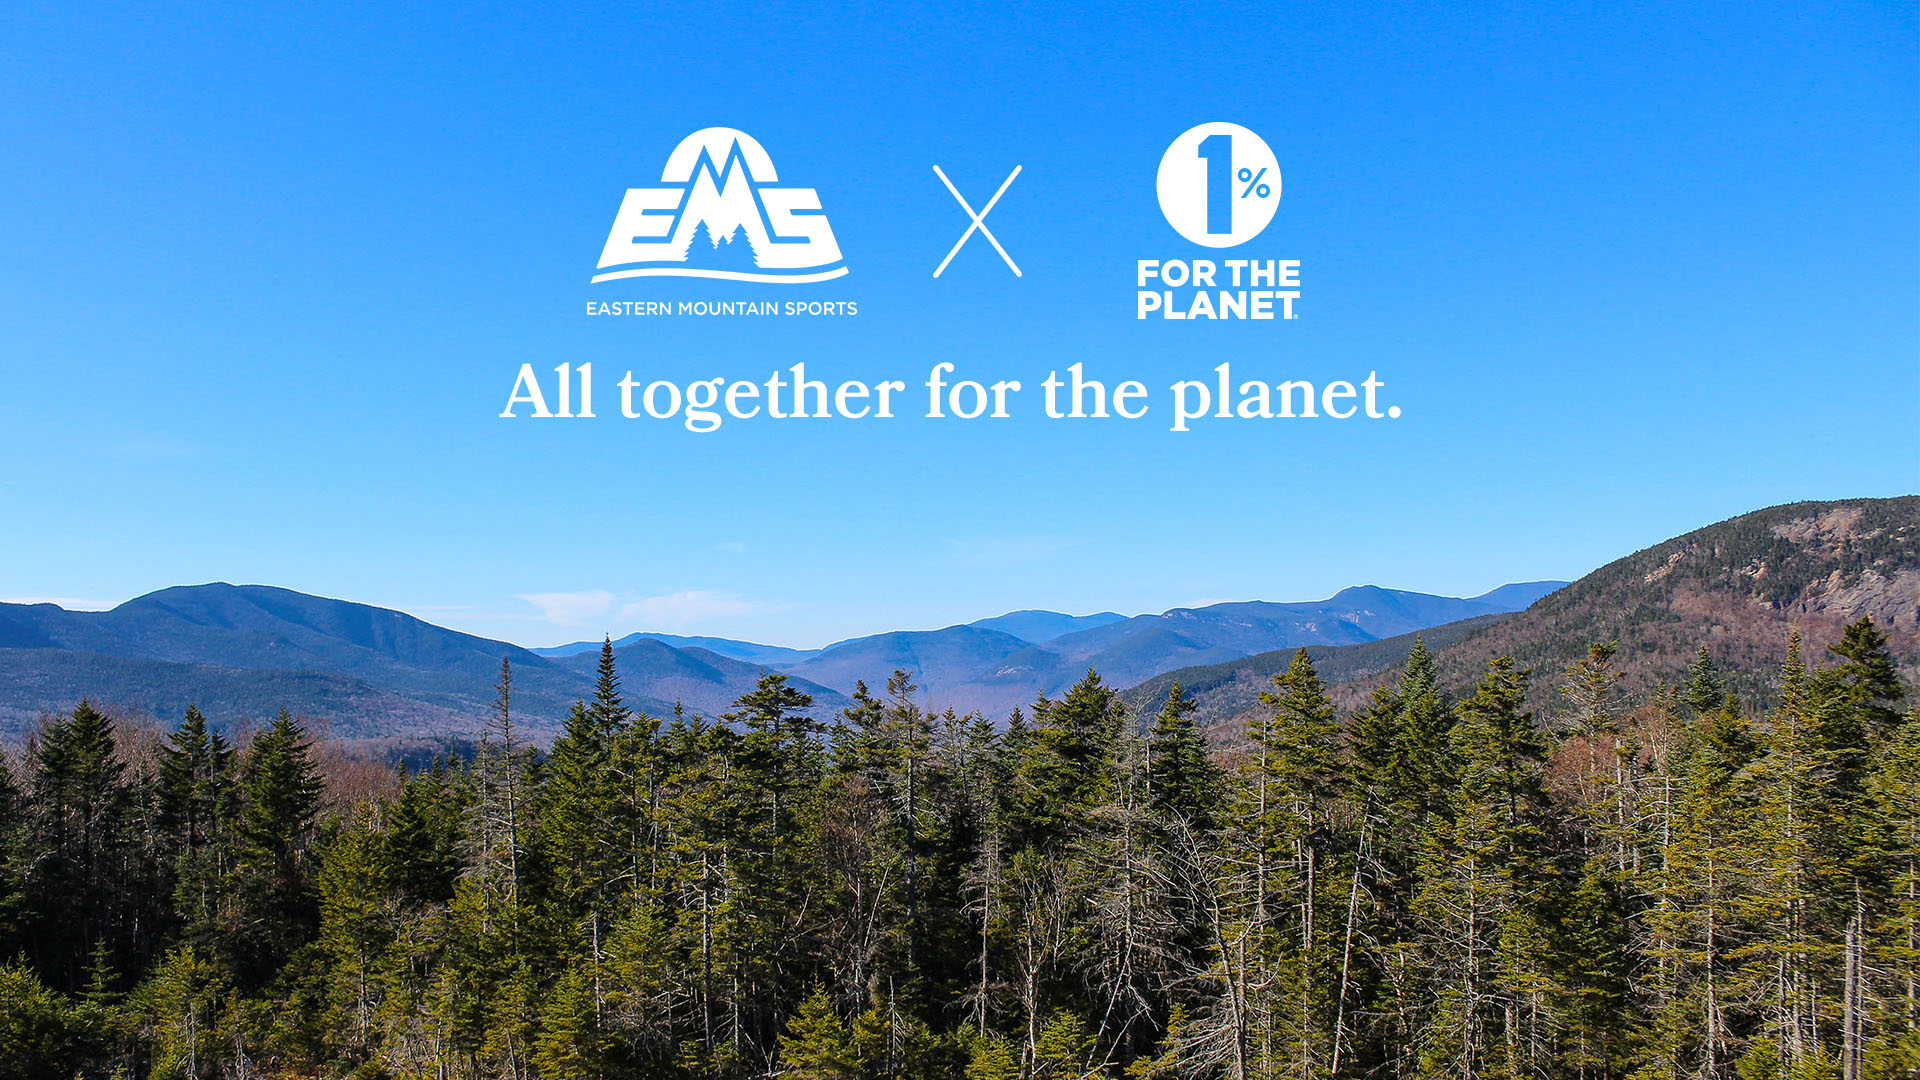 EASTERN MOUNTAIN SPORTS JOINS 1% FOR THE PLANET GLOBAL NETWORK AND ANNOUNCES RETURN TO VERMONT MARKET AS EXPANSION AND GROWTH PLANS CONTINUE